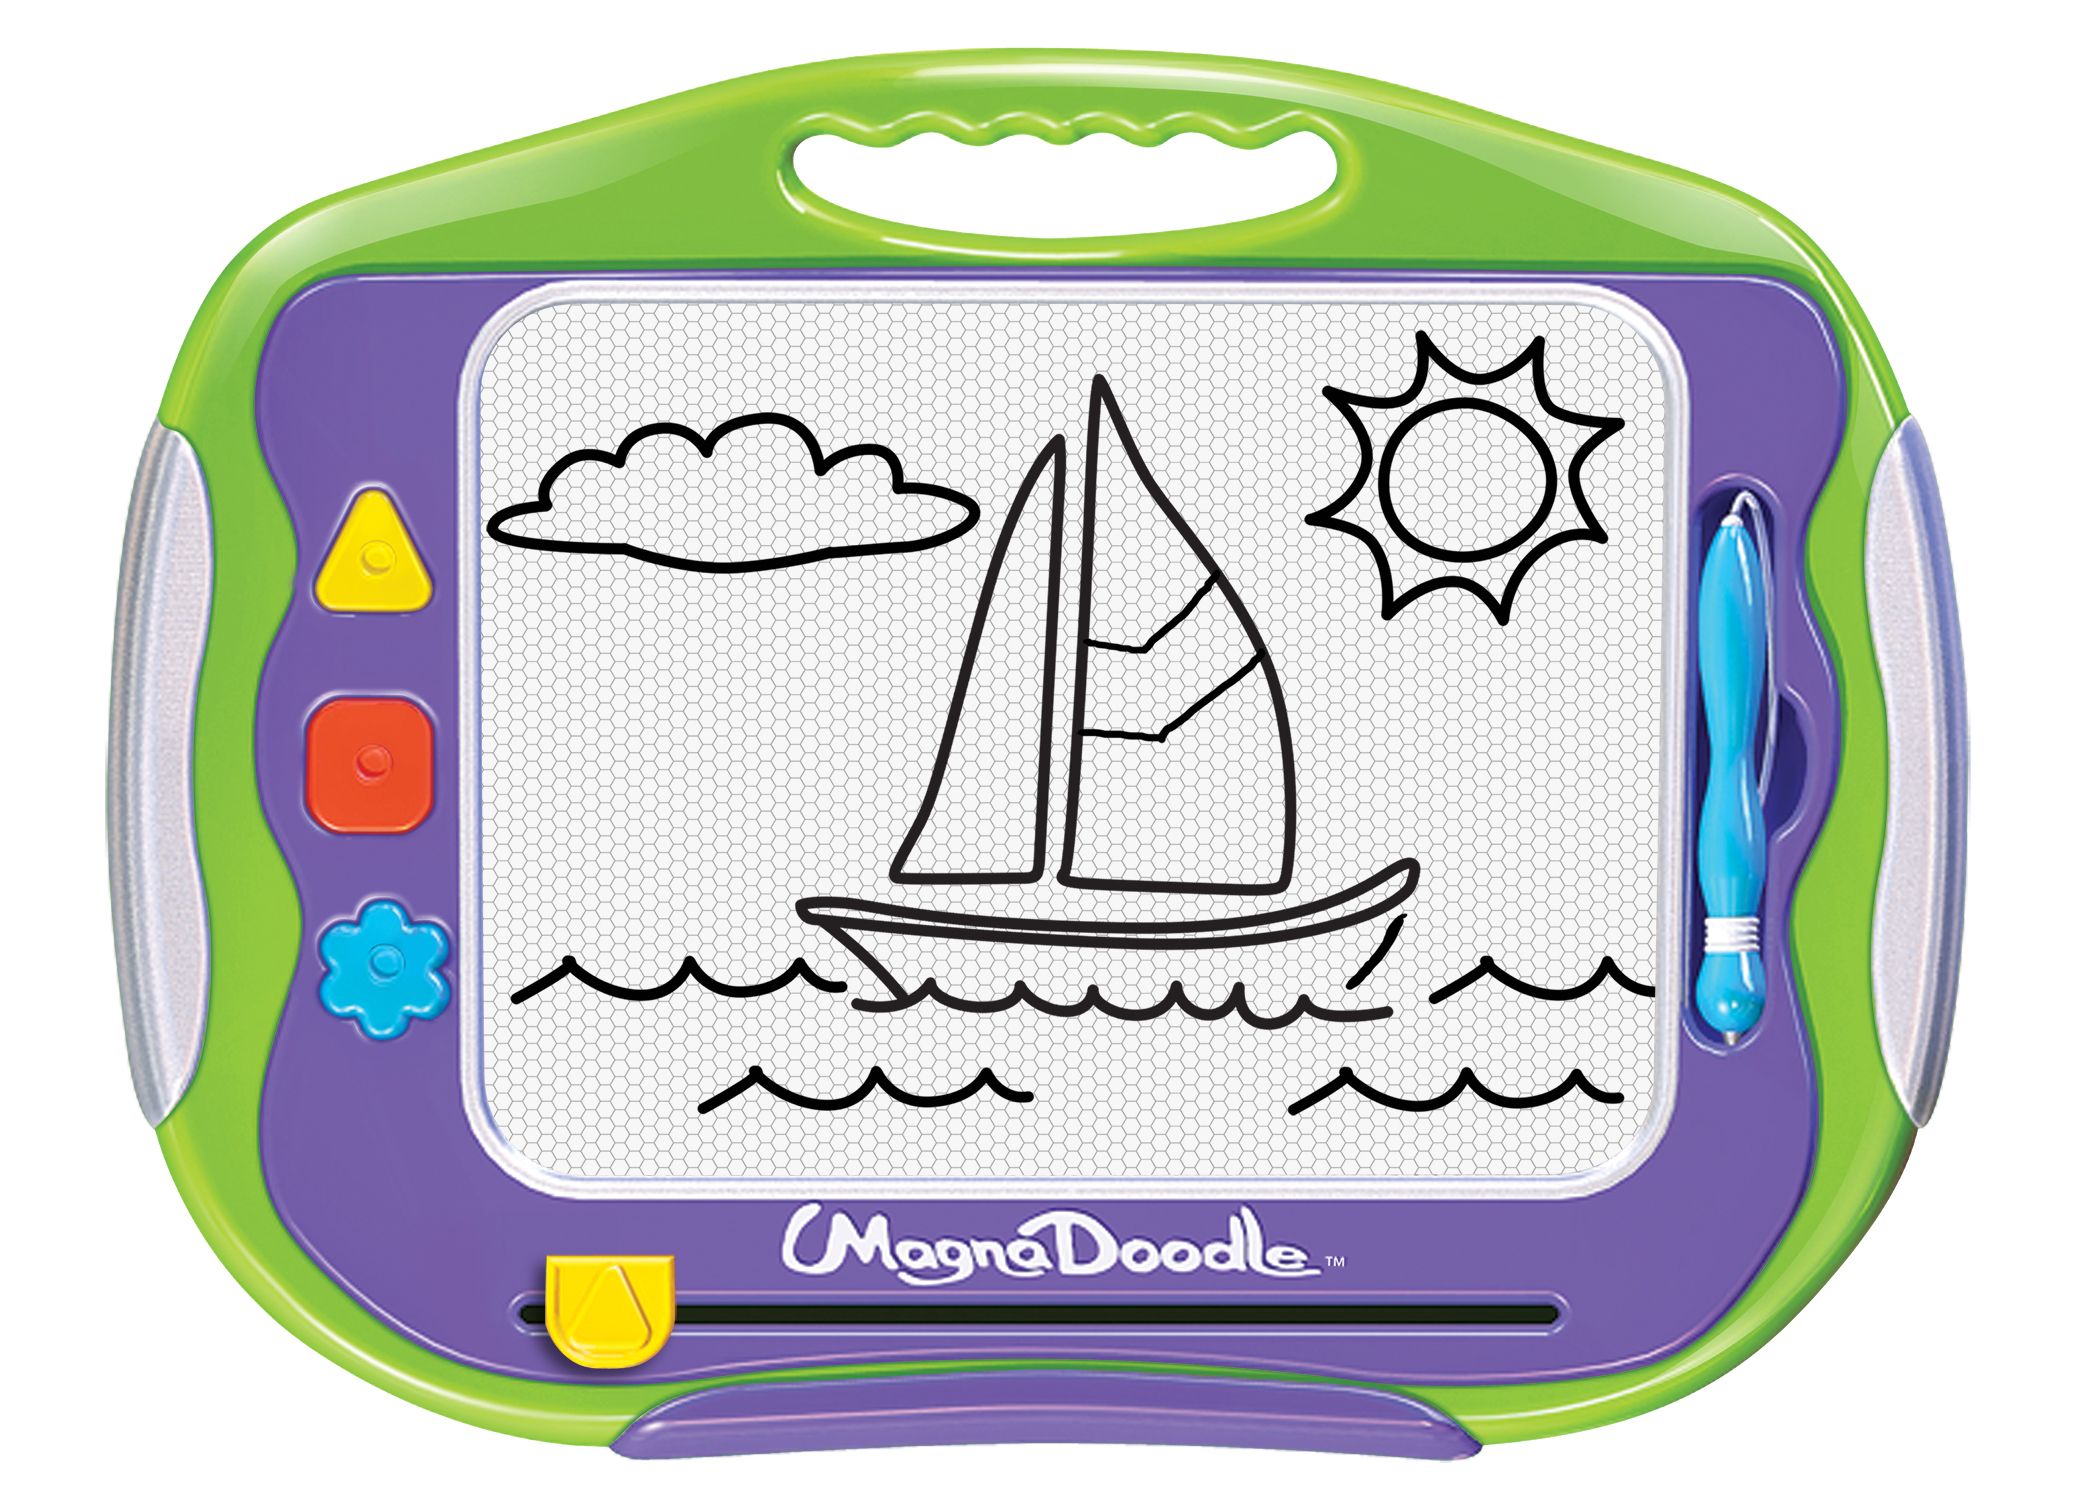 Cra-Z-Art Original Magna Doodle for Child to be Creative Learning Activity 